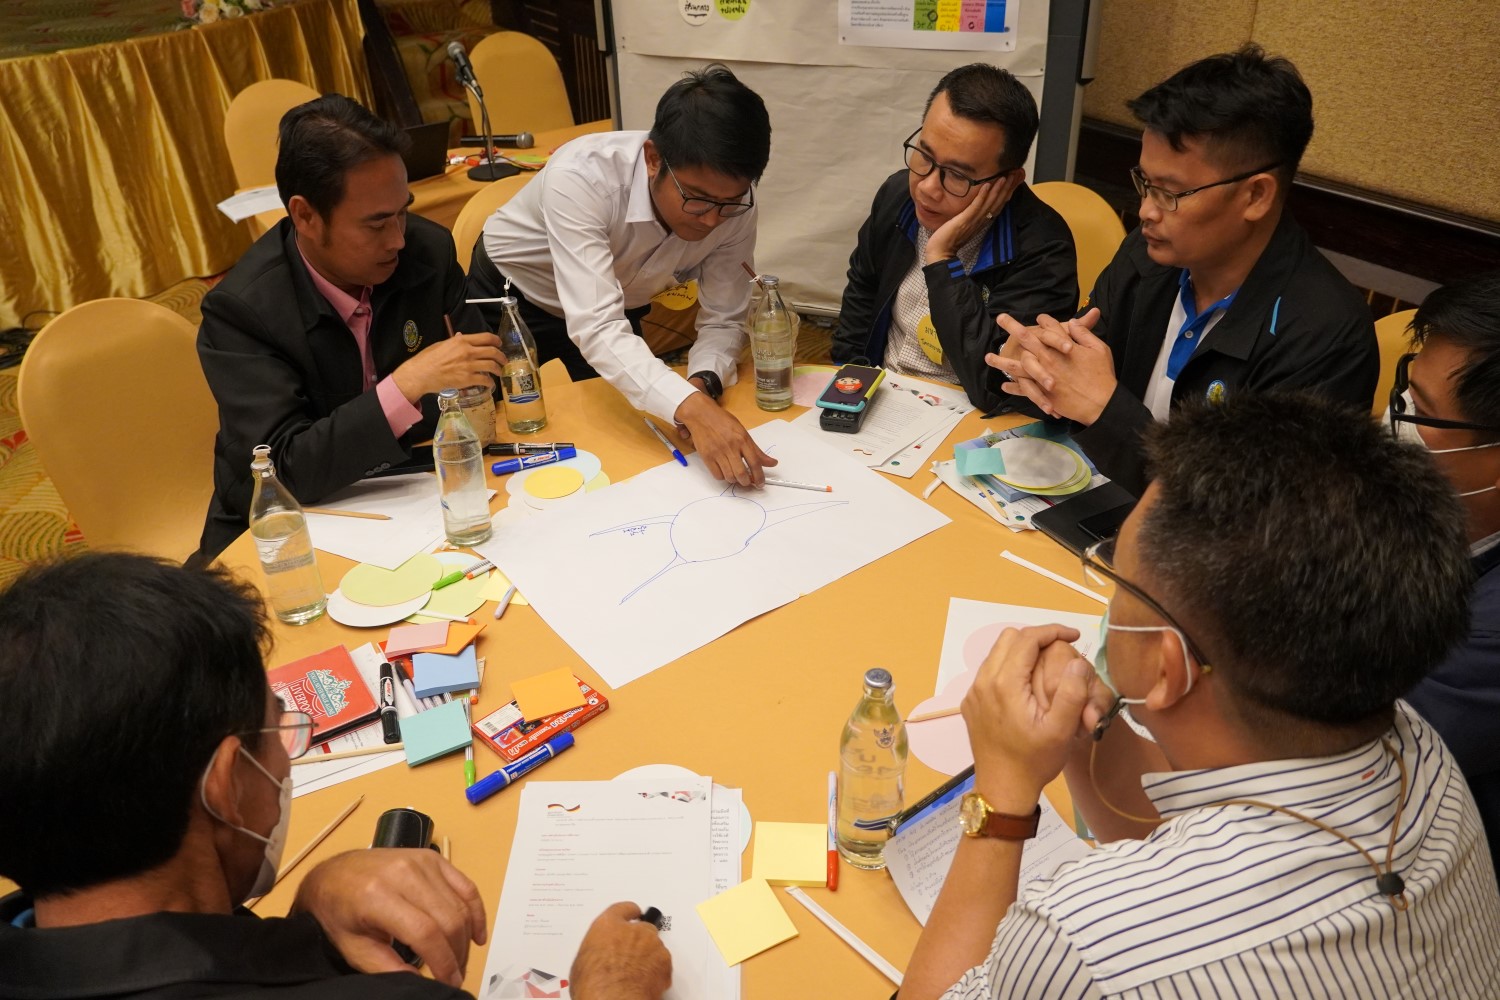 Group Activity: members from different departments shared their opinions to foster open discussions. The feedback received will be used to enhance and ensure project success.